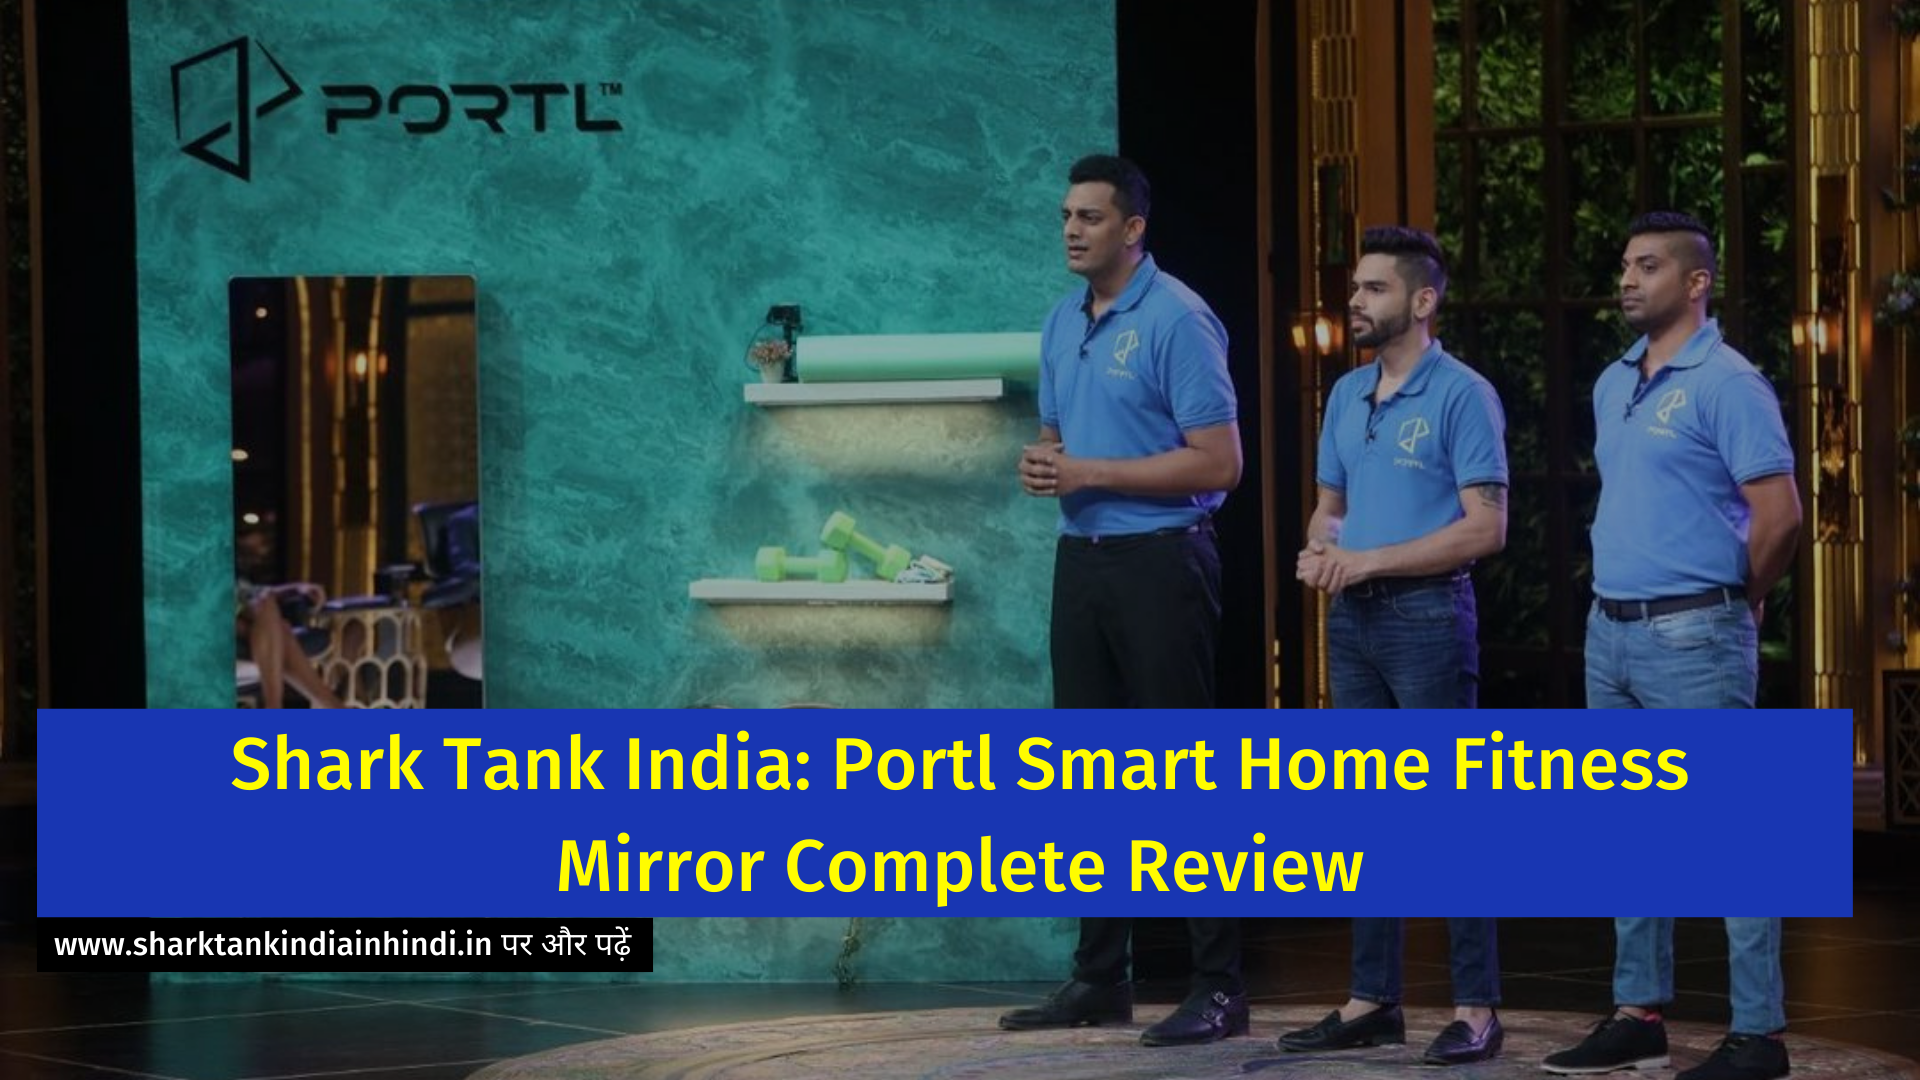 Shark Tank India: Portl Smart Home Fitness Mirror Complete Review